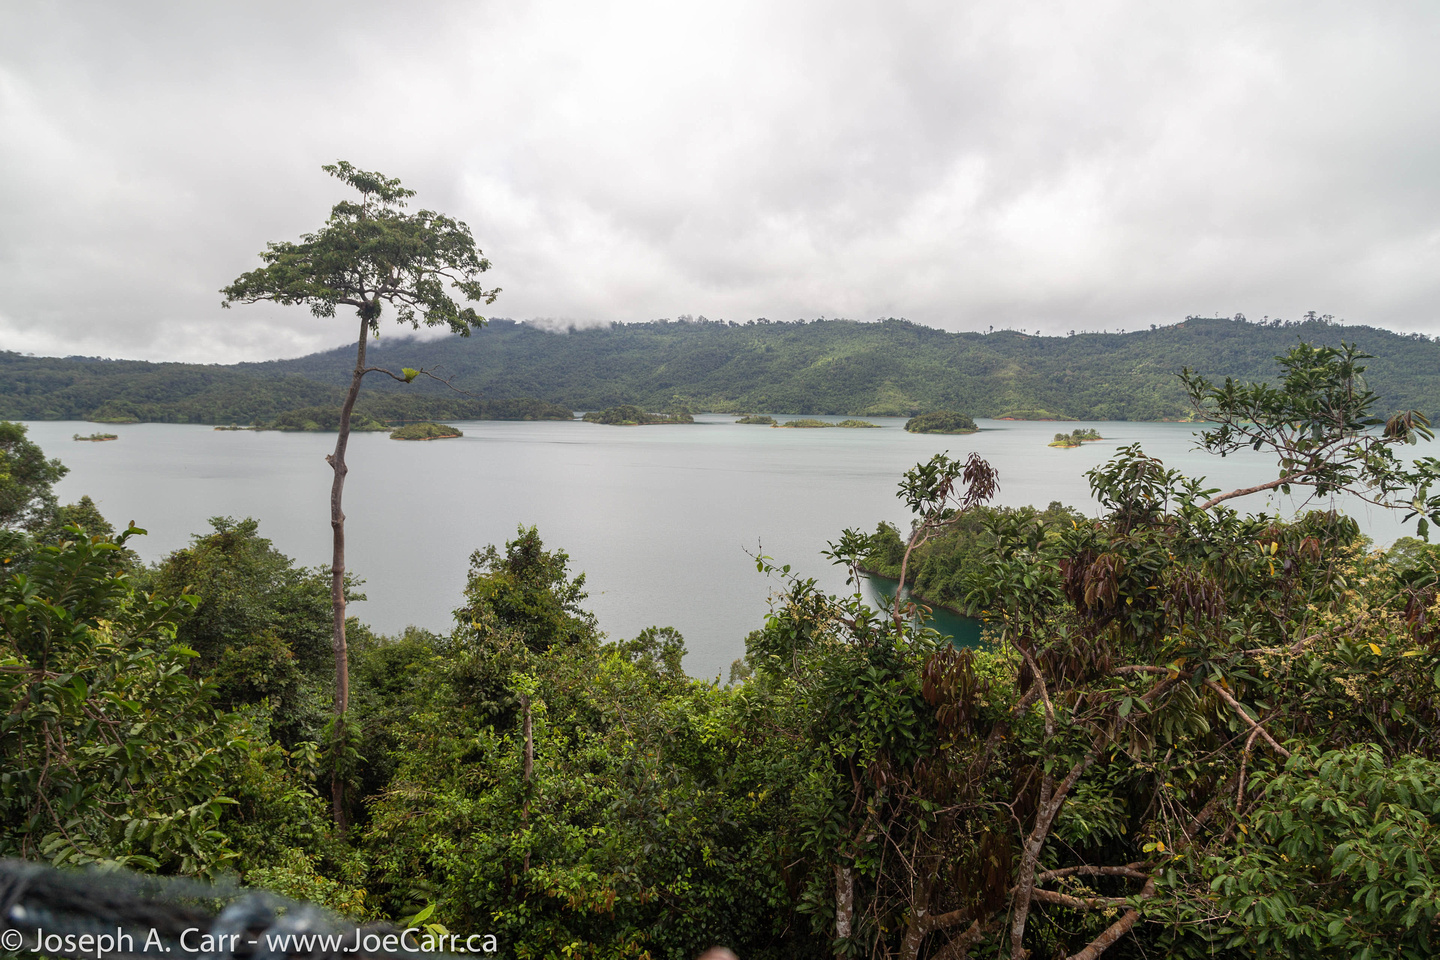 The view of the rainforest and lake from the cable walkway